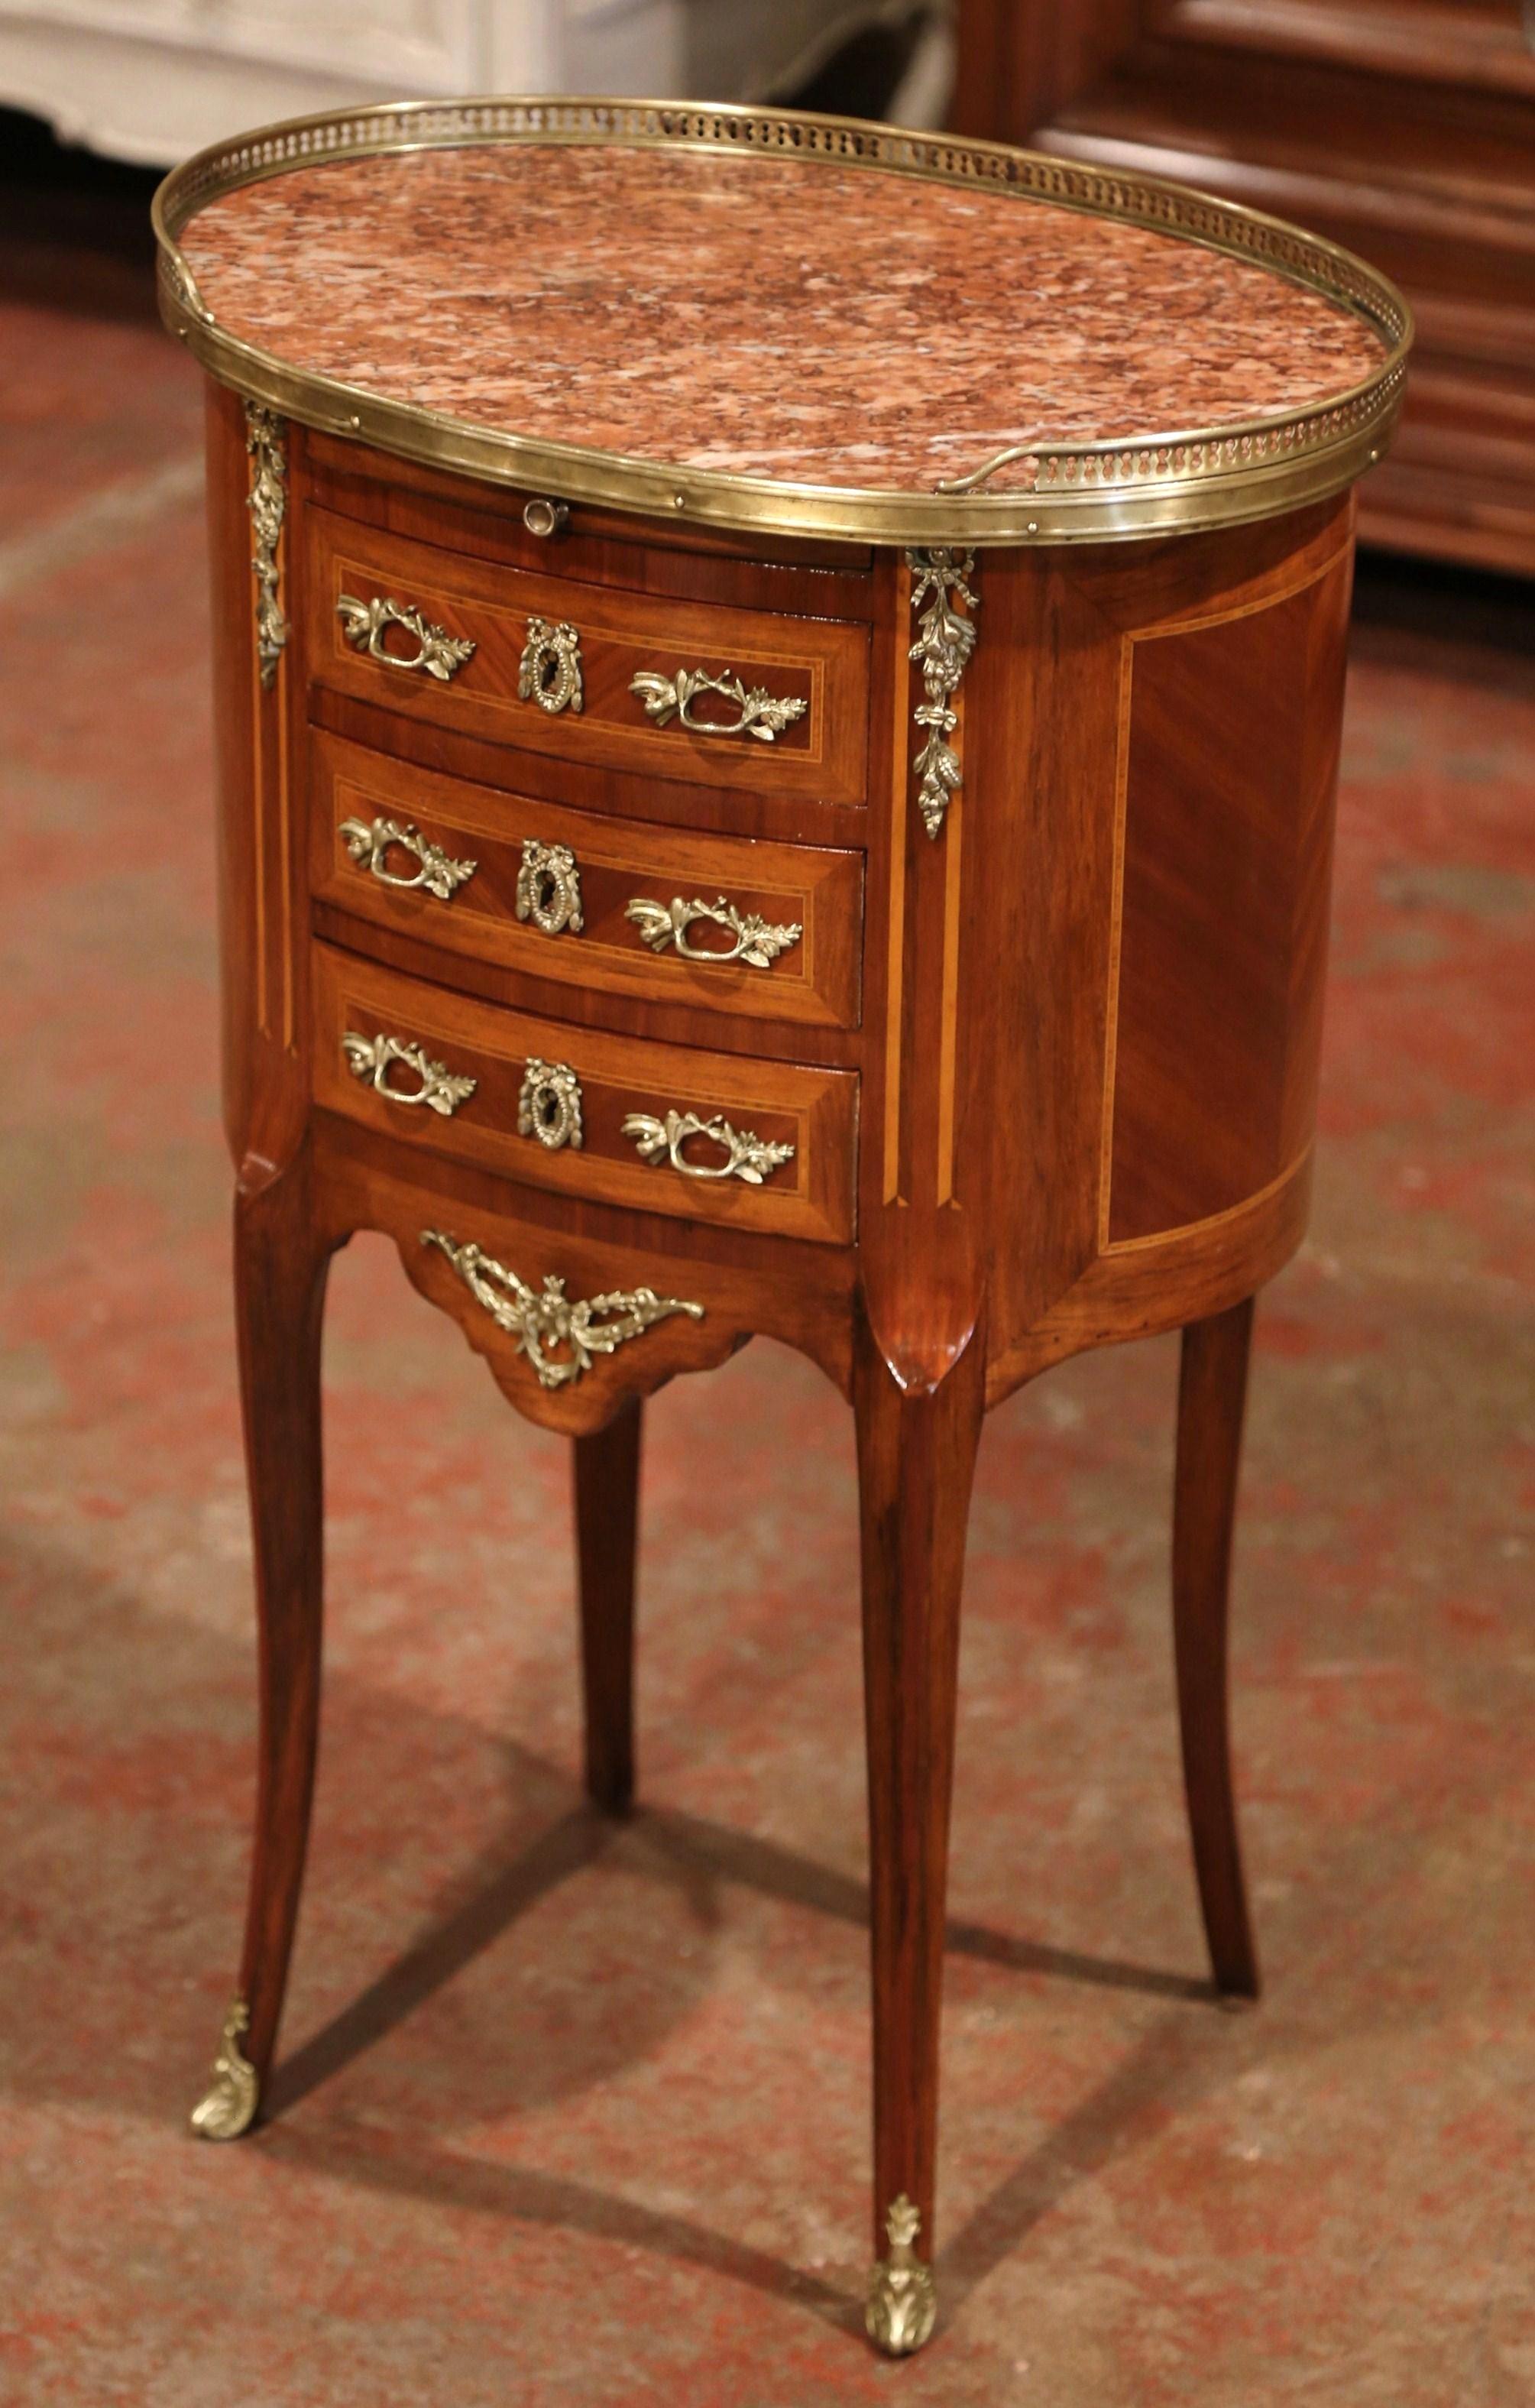 Hand-Carved 19th Century French Walnut Parquetry and Inlay Chest of Drawers with Marble Top